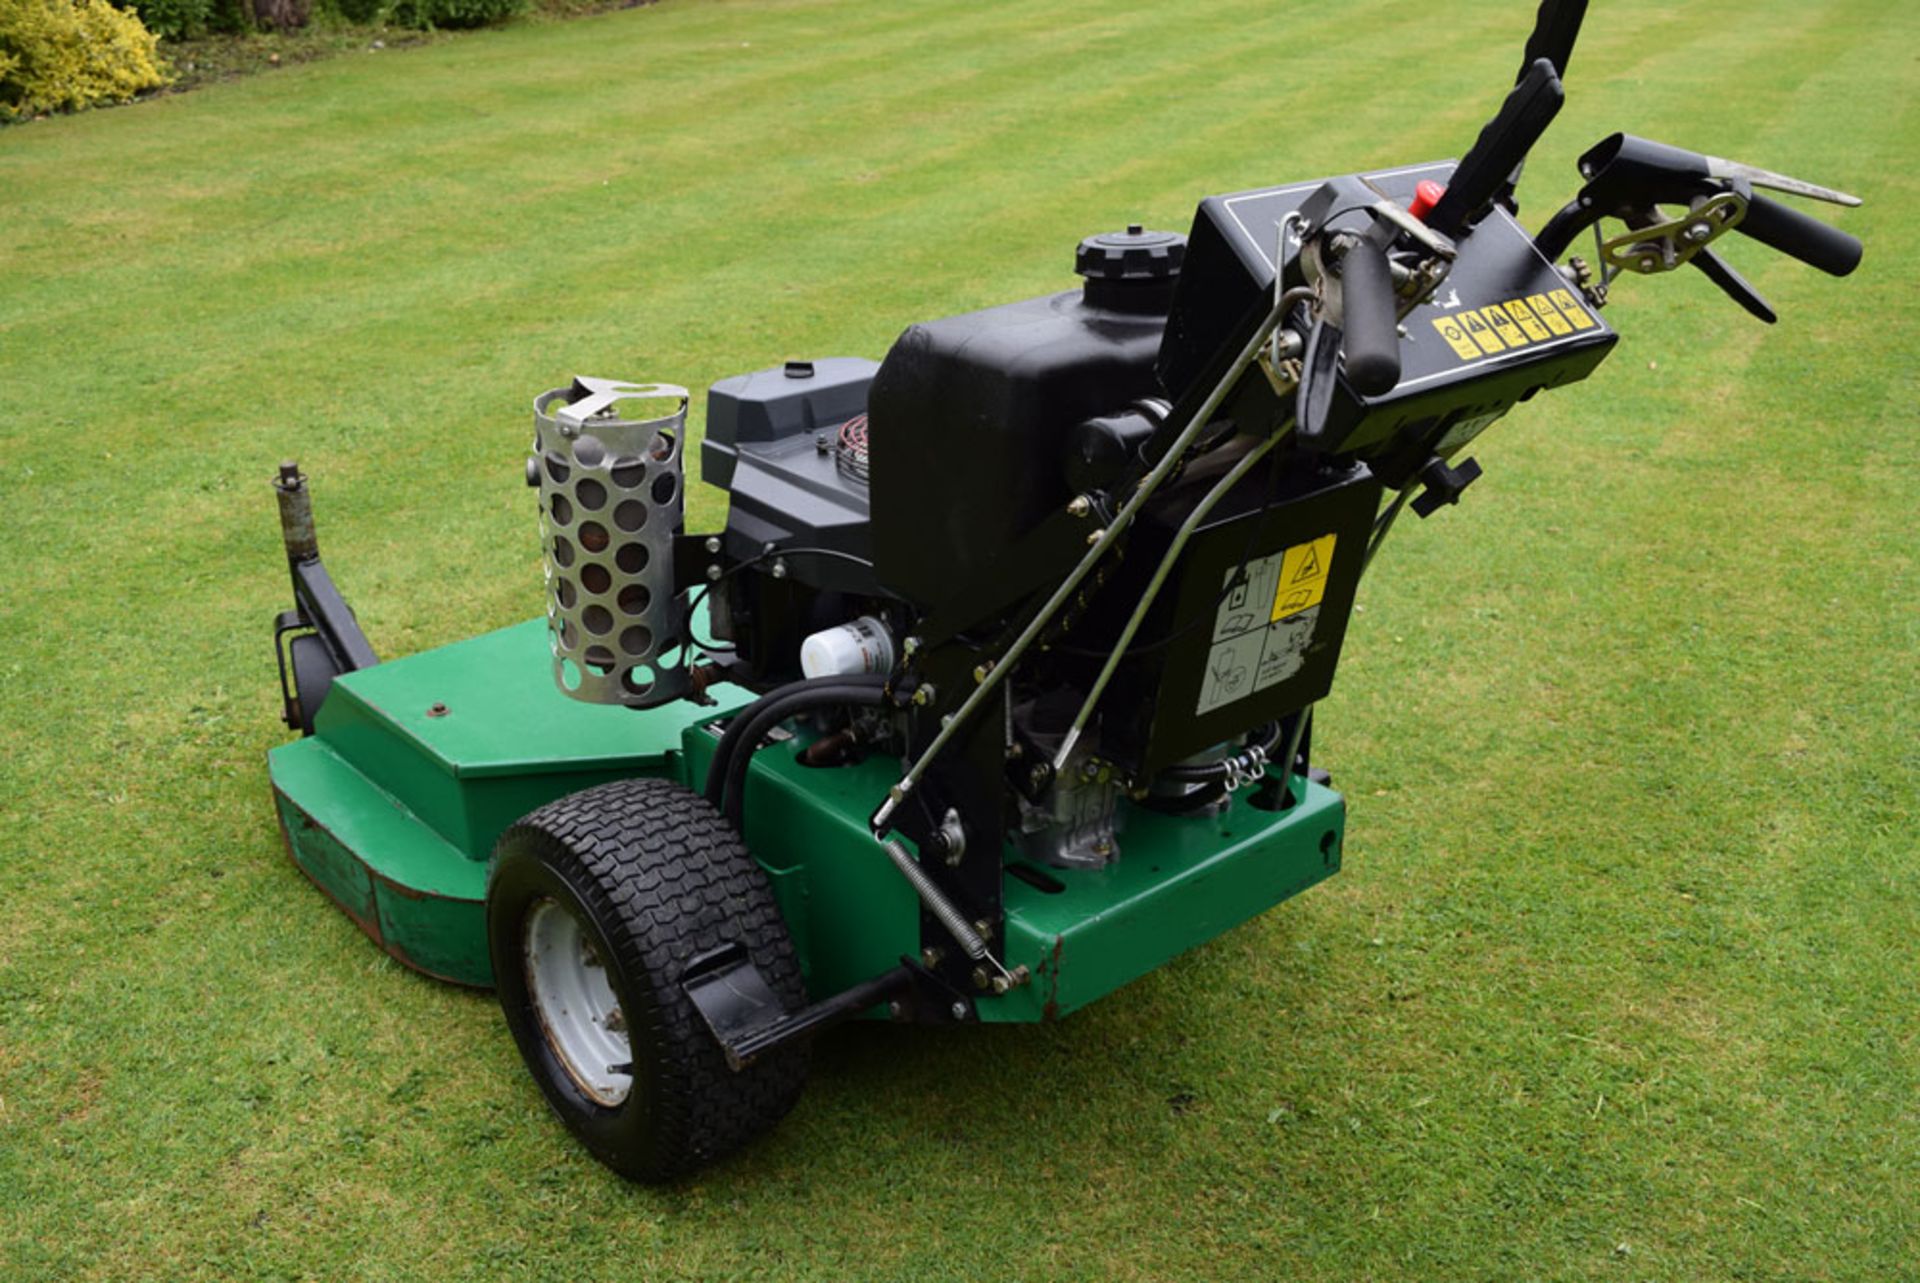 2008 Ransomes Pedestrian 36"""" Commercial Walk Behind Zero Turn Rotary Mower - Image 9 of 9